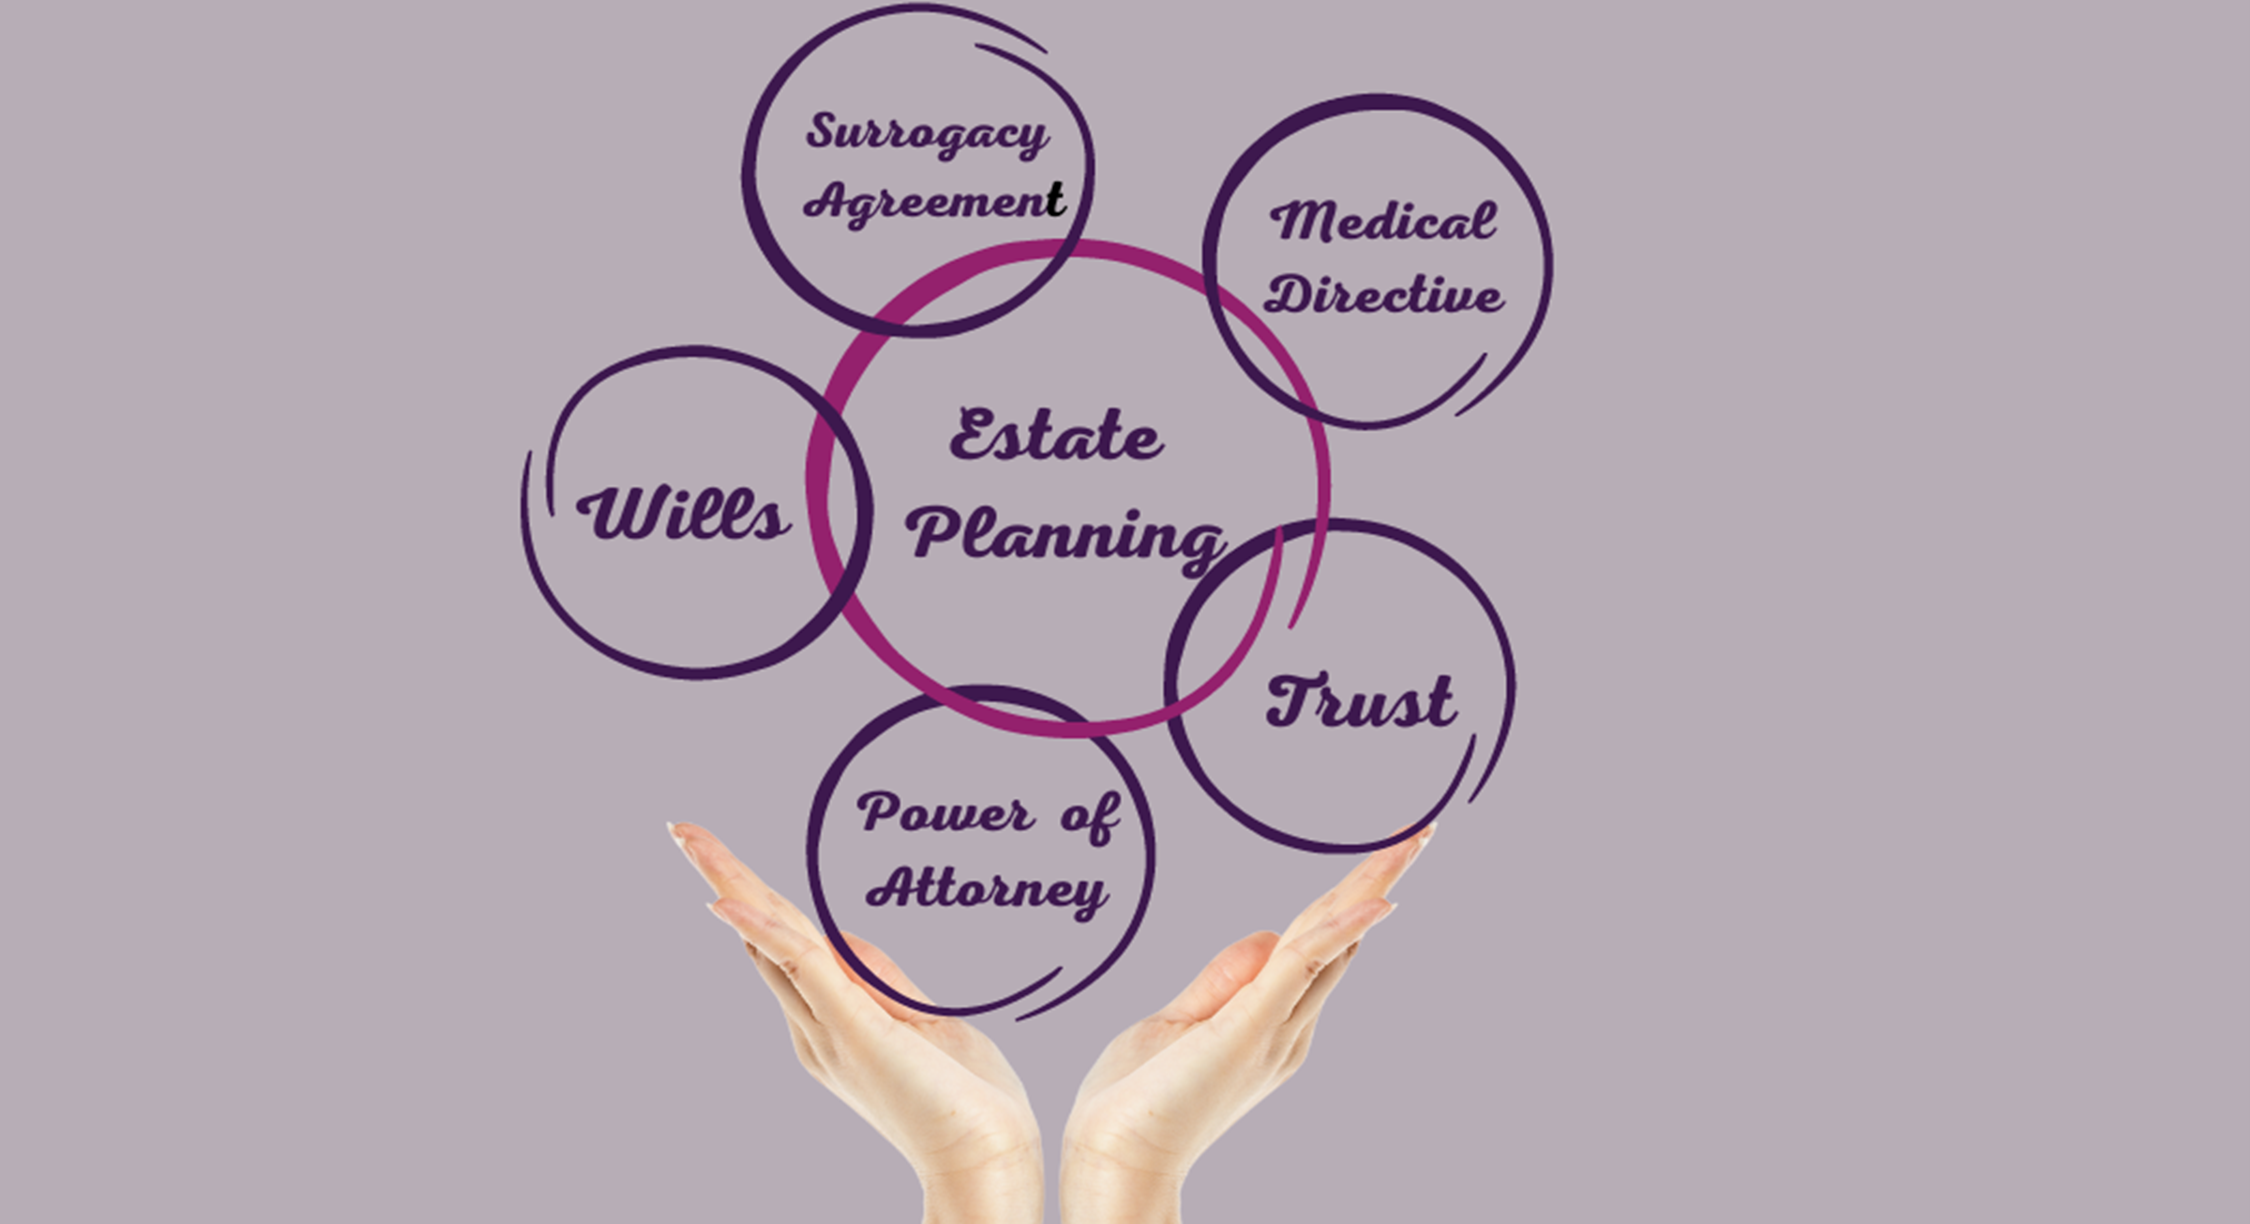 Reproduction and Estate Planning show in circles each with a section related to estate planning